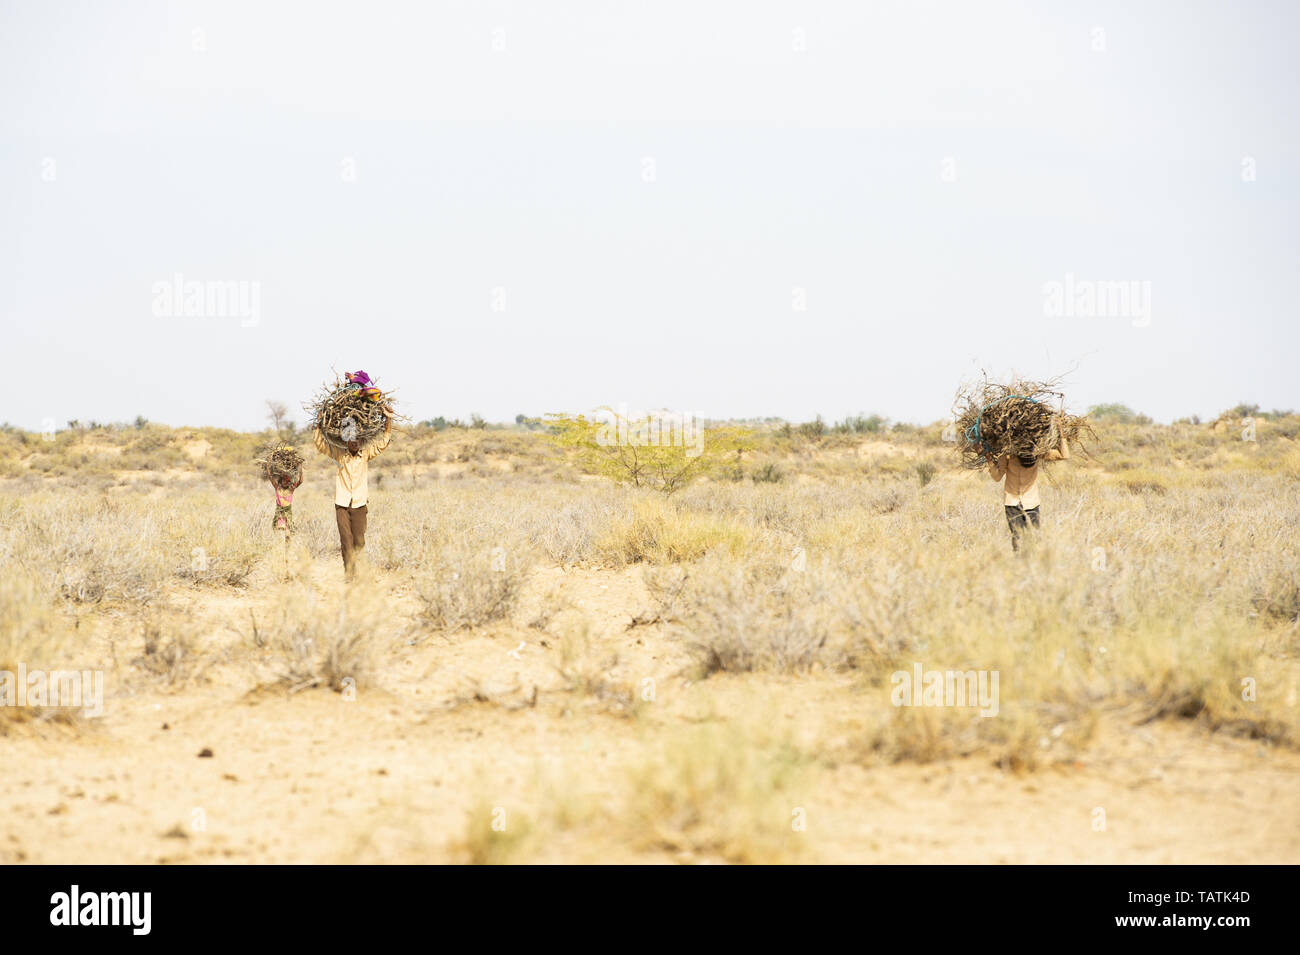 Poor and young children are carrying heavy bunches of dry wood on their heads in the middle of the Thar Desert, Jaisalmer, Rajasthan, India. Stock Photo